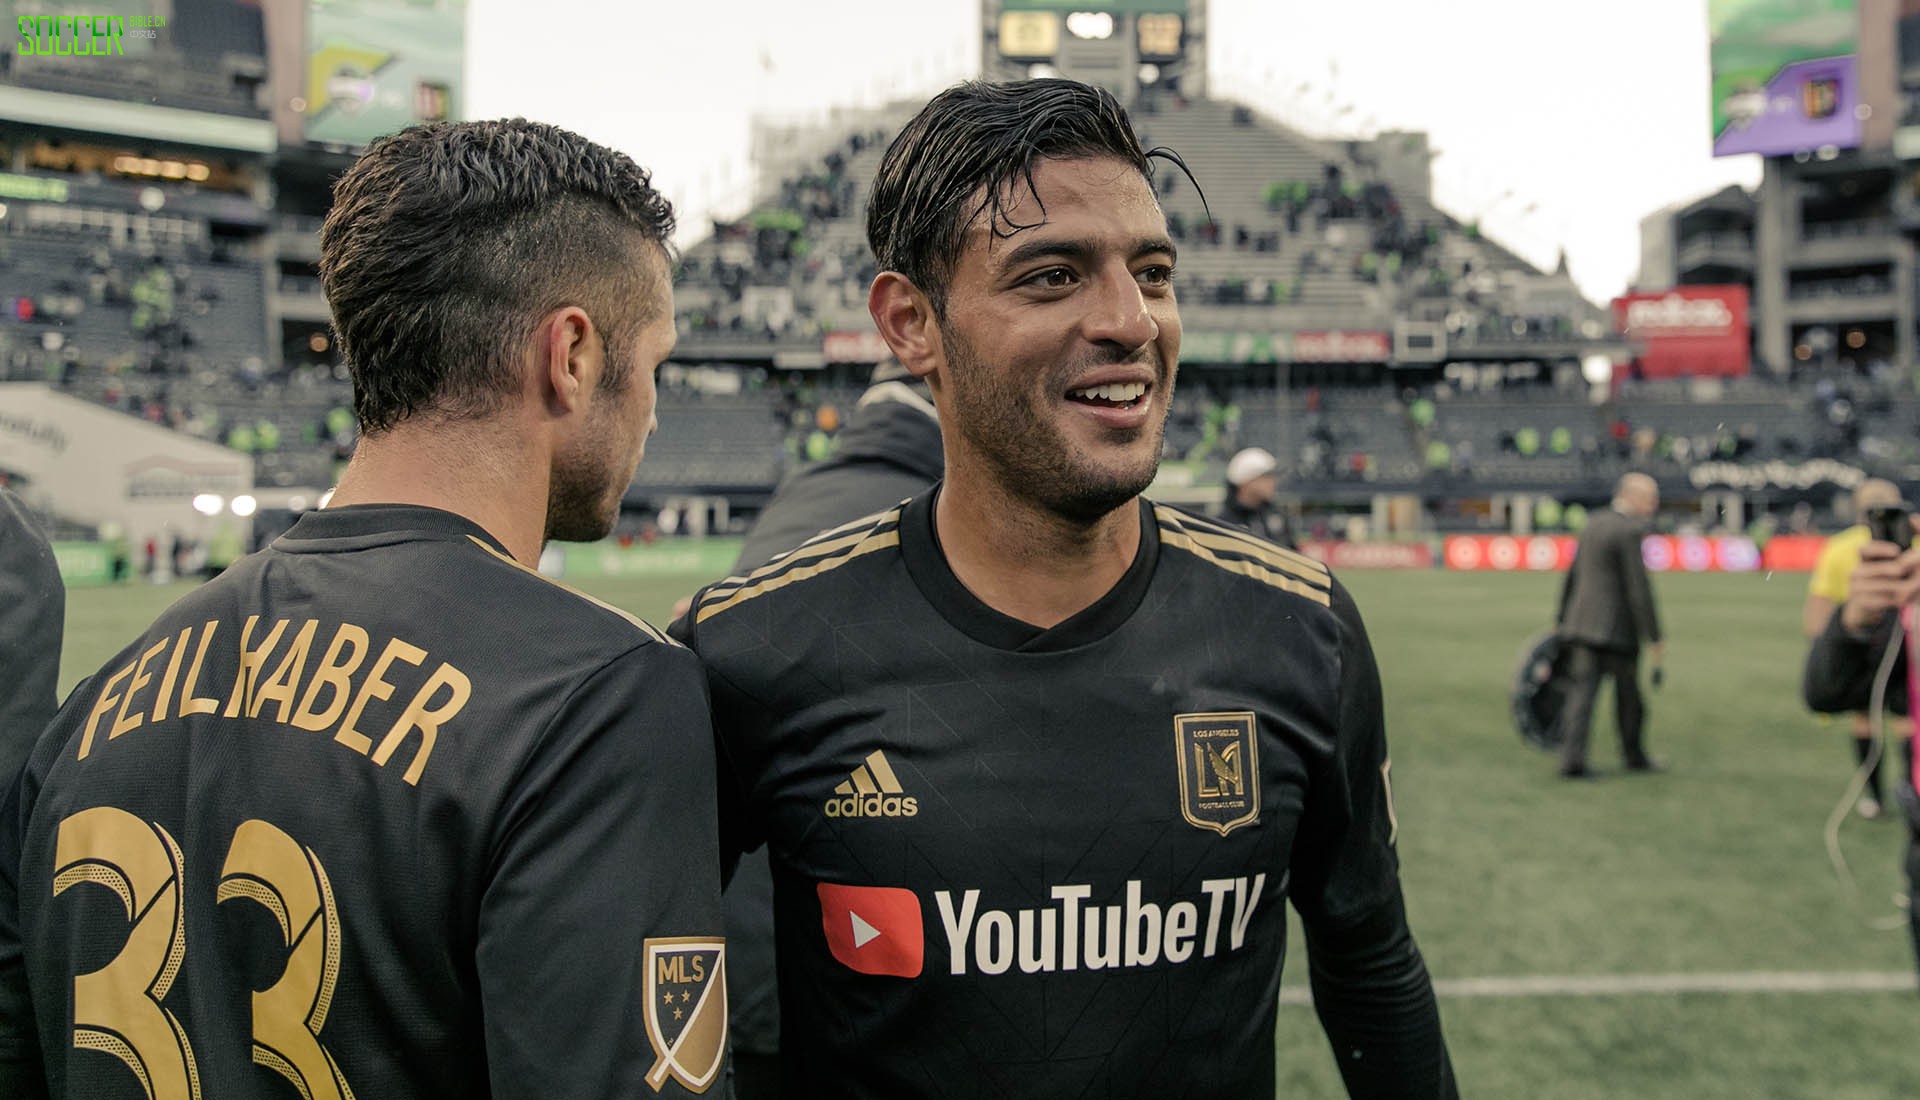 lafc-first-win-soccerbible_0010_2o7a9904